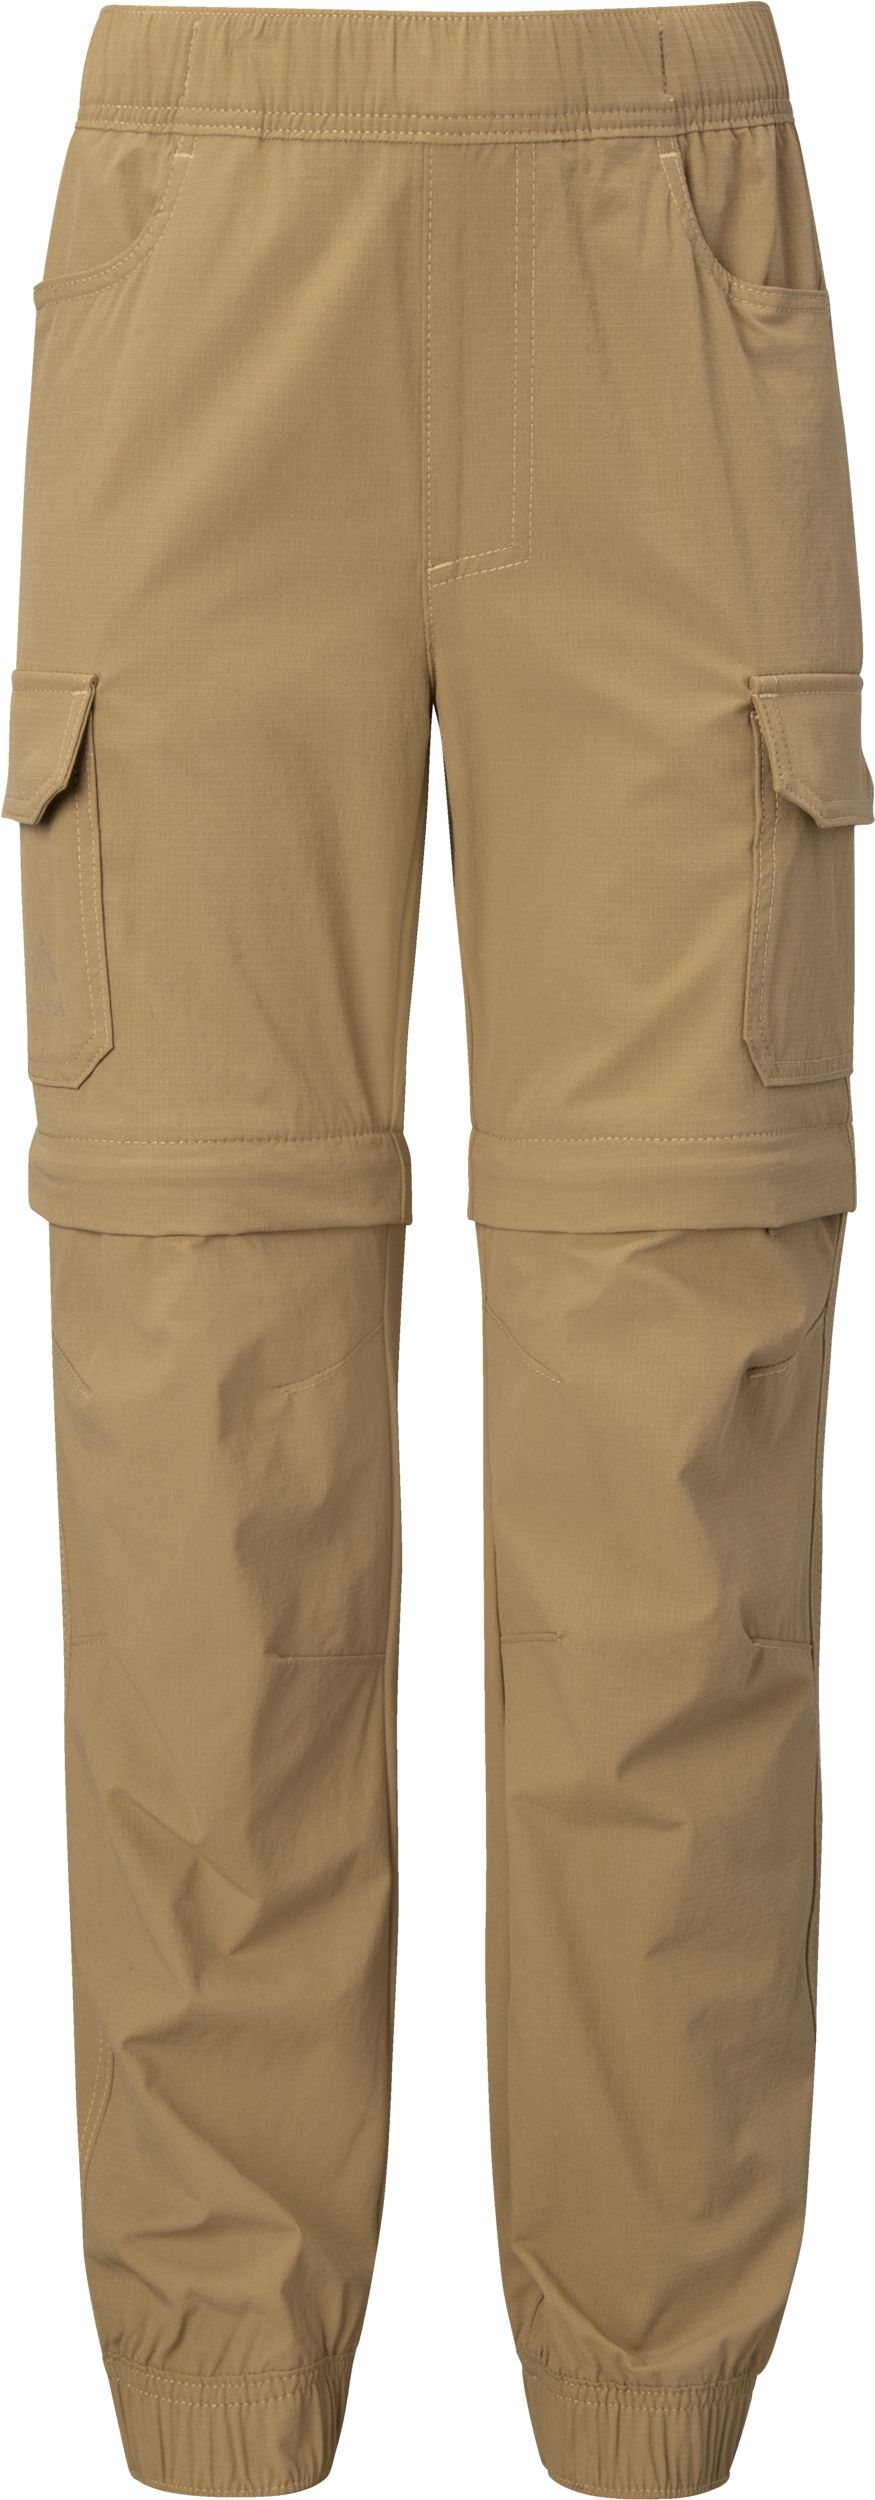 Image of Woods Boys' Ernst Convertible Hiking Pants